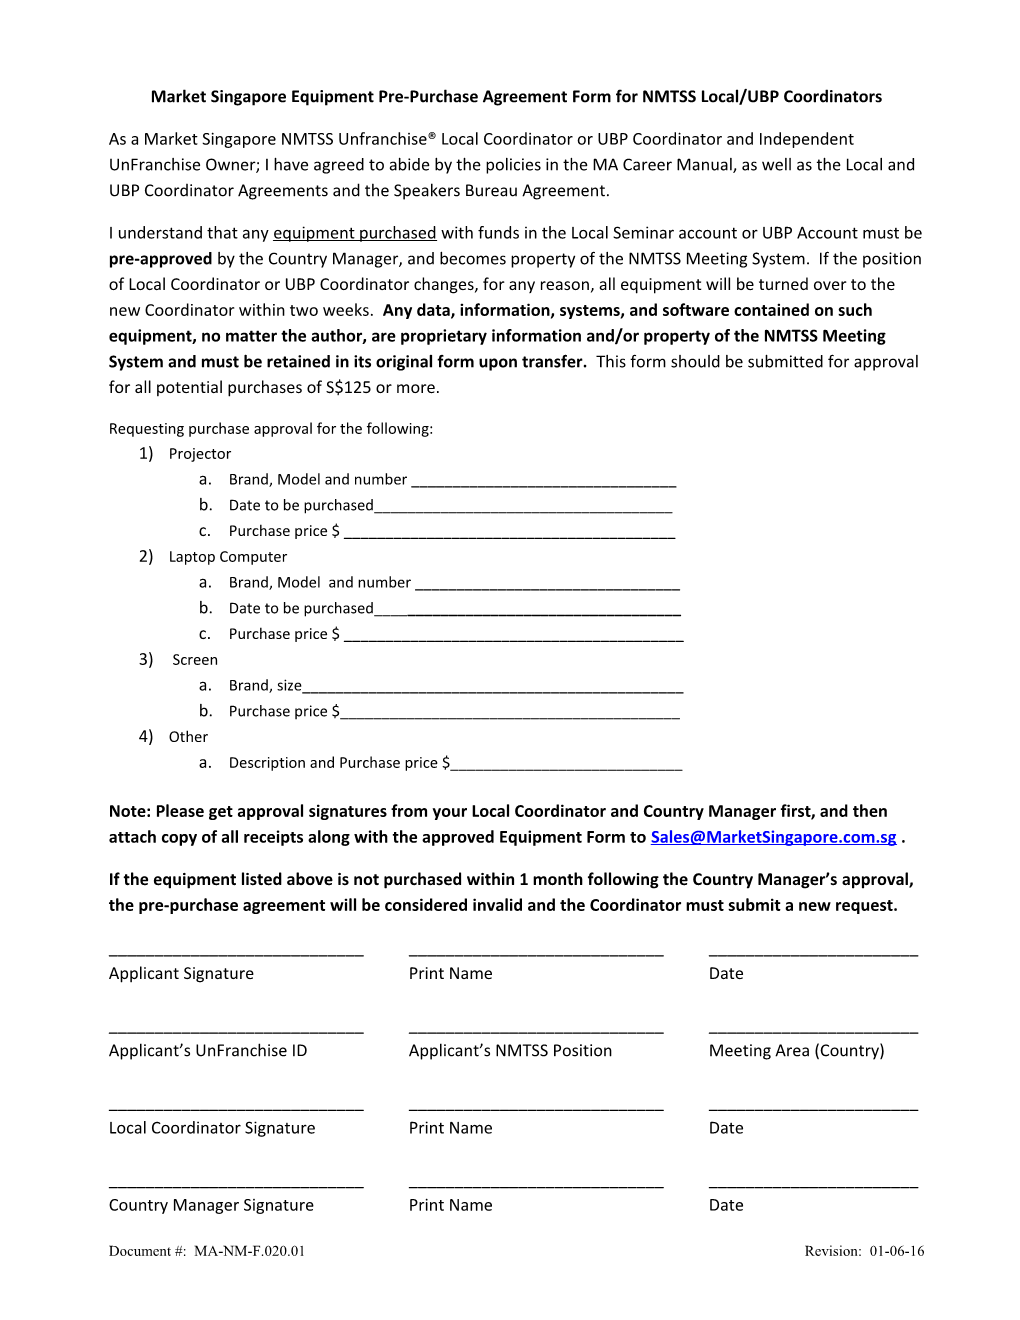 Market Singapore Equipment Pre-Purchase Agreement Form for NMTSS Local/UBP Coordinators